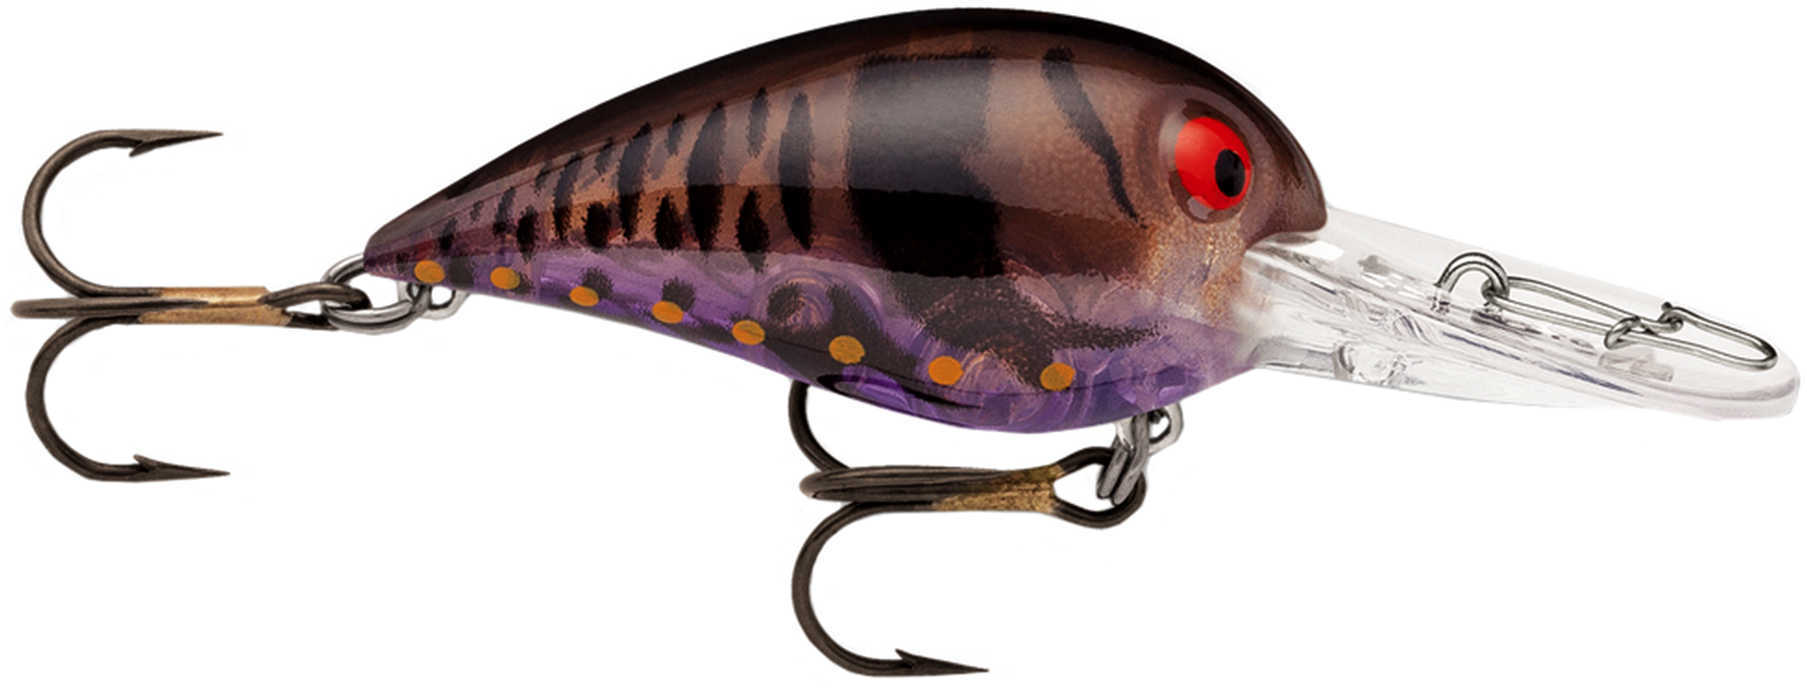 Storm Original Wiggle Wart Lure 2-Inches Number 4 Hook, Phantom Peanut Butter Jelly Craw, Per 1 Md: